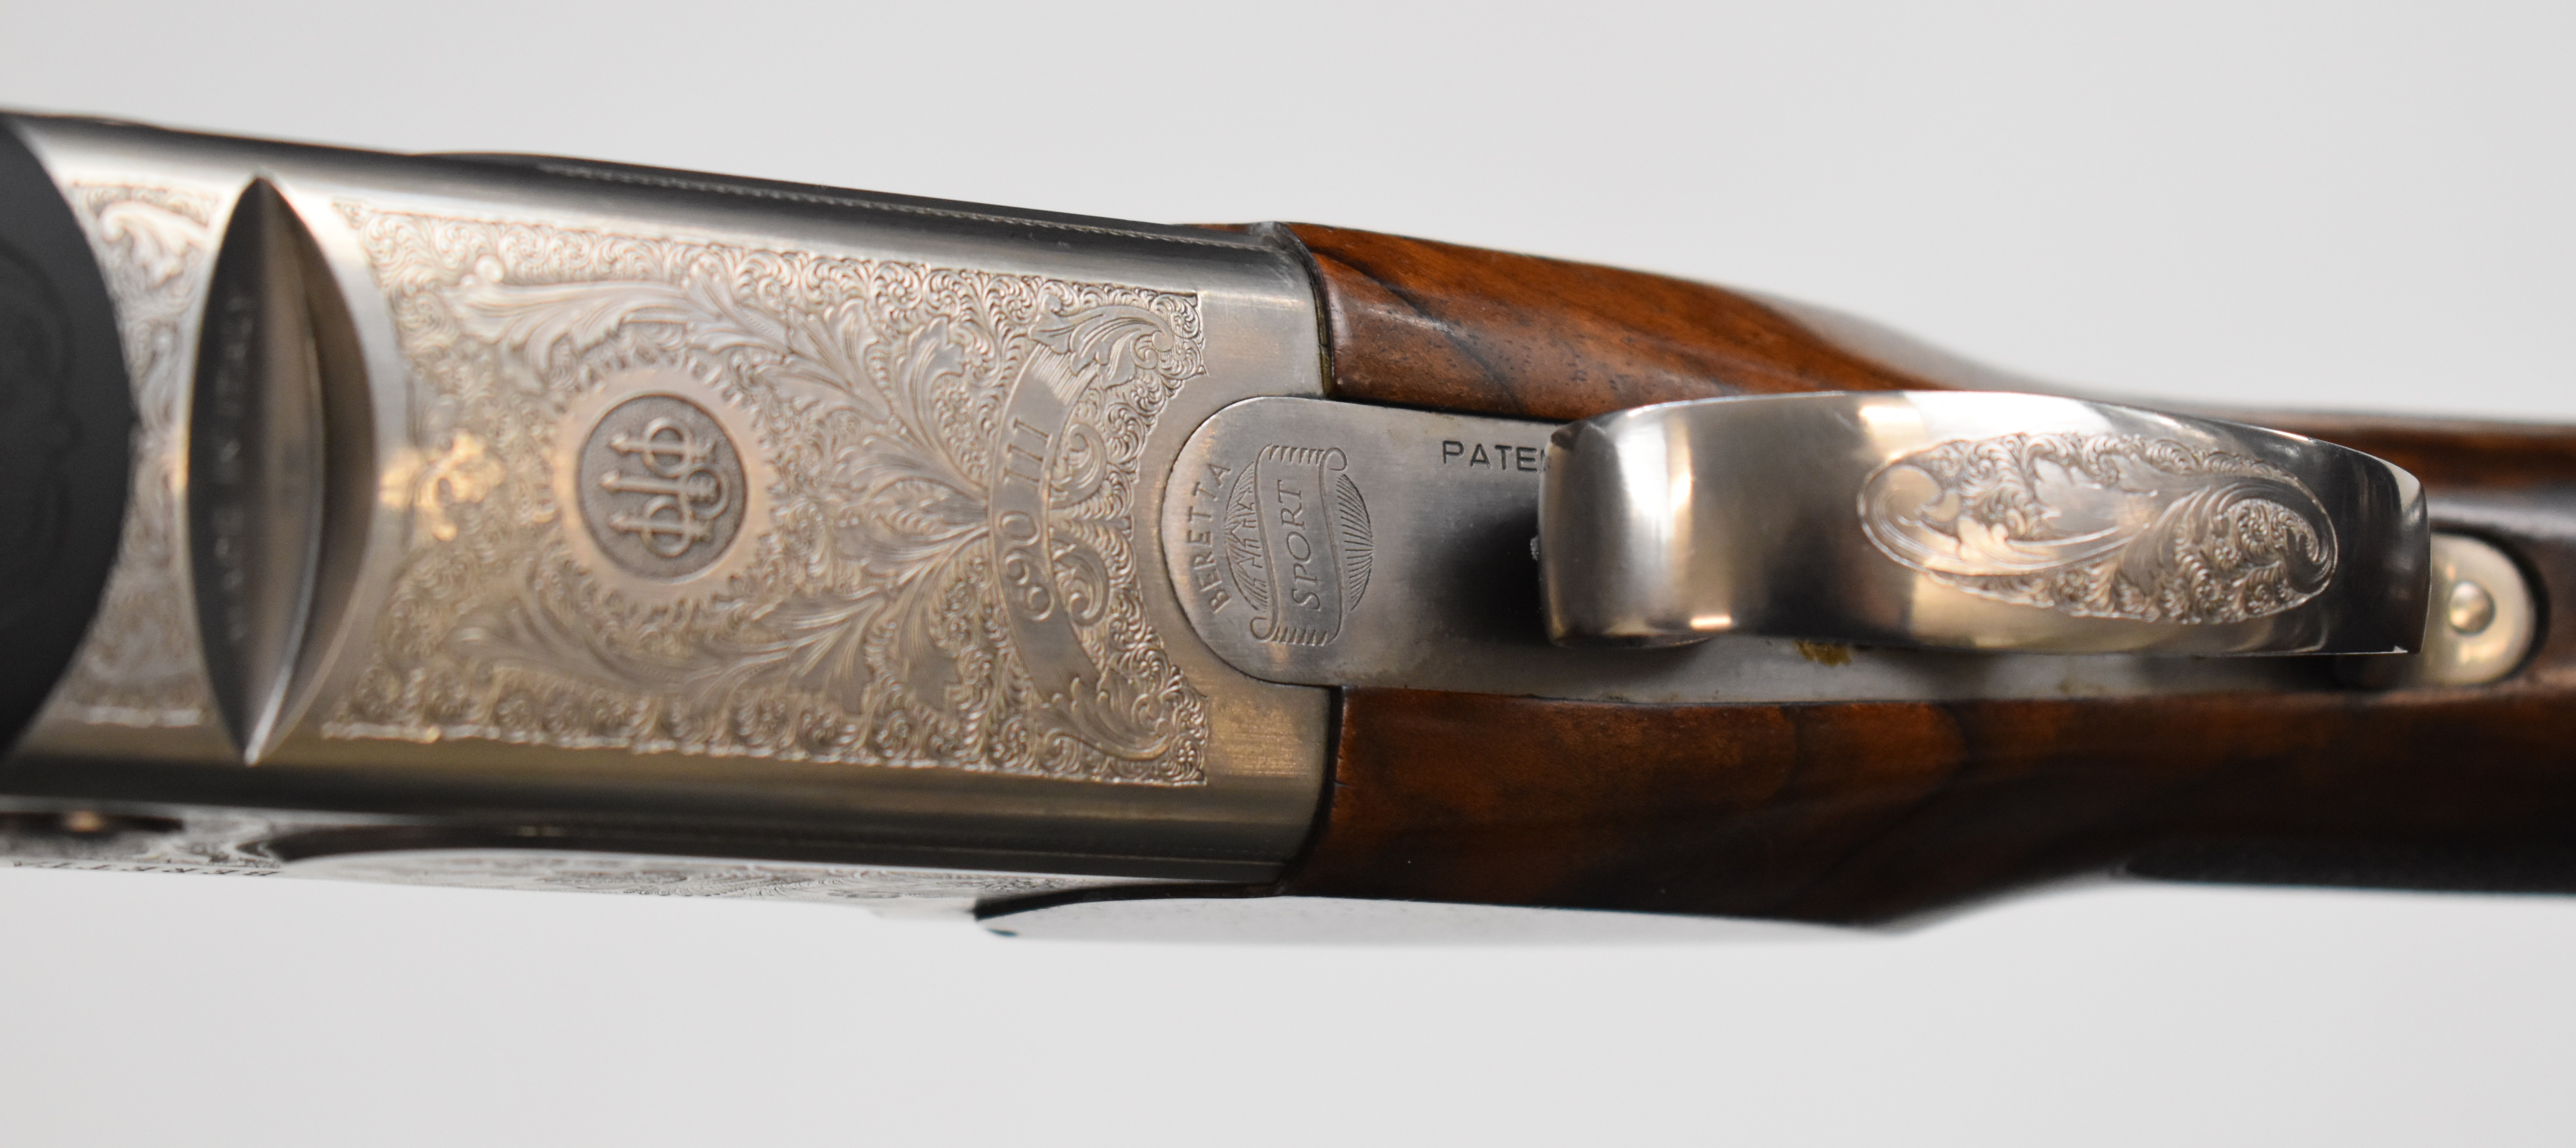 Beretta 690 III Sporting 12 bore over and under ejector shotgun with named and engraved scenes of - Image 12 of 15